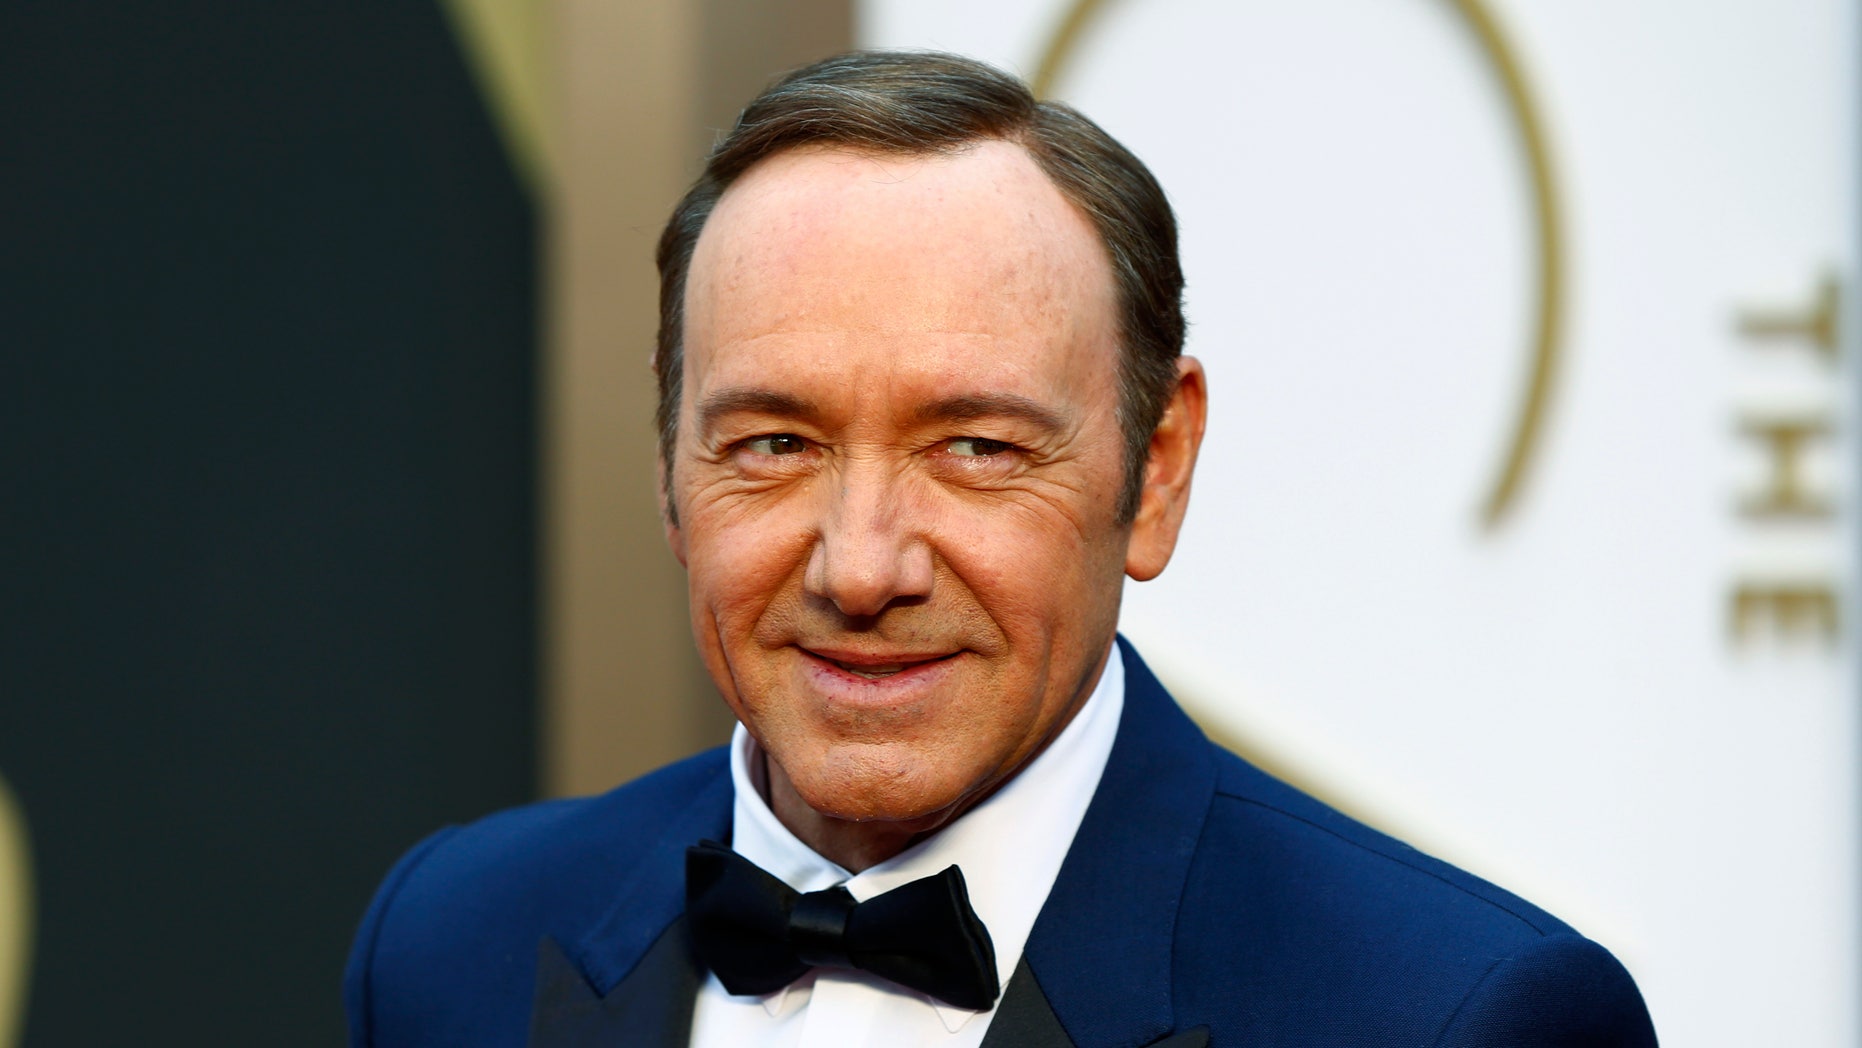 Kevin Spacey stops play to shout at fan whose cell phone rang Fox News